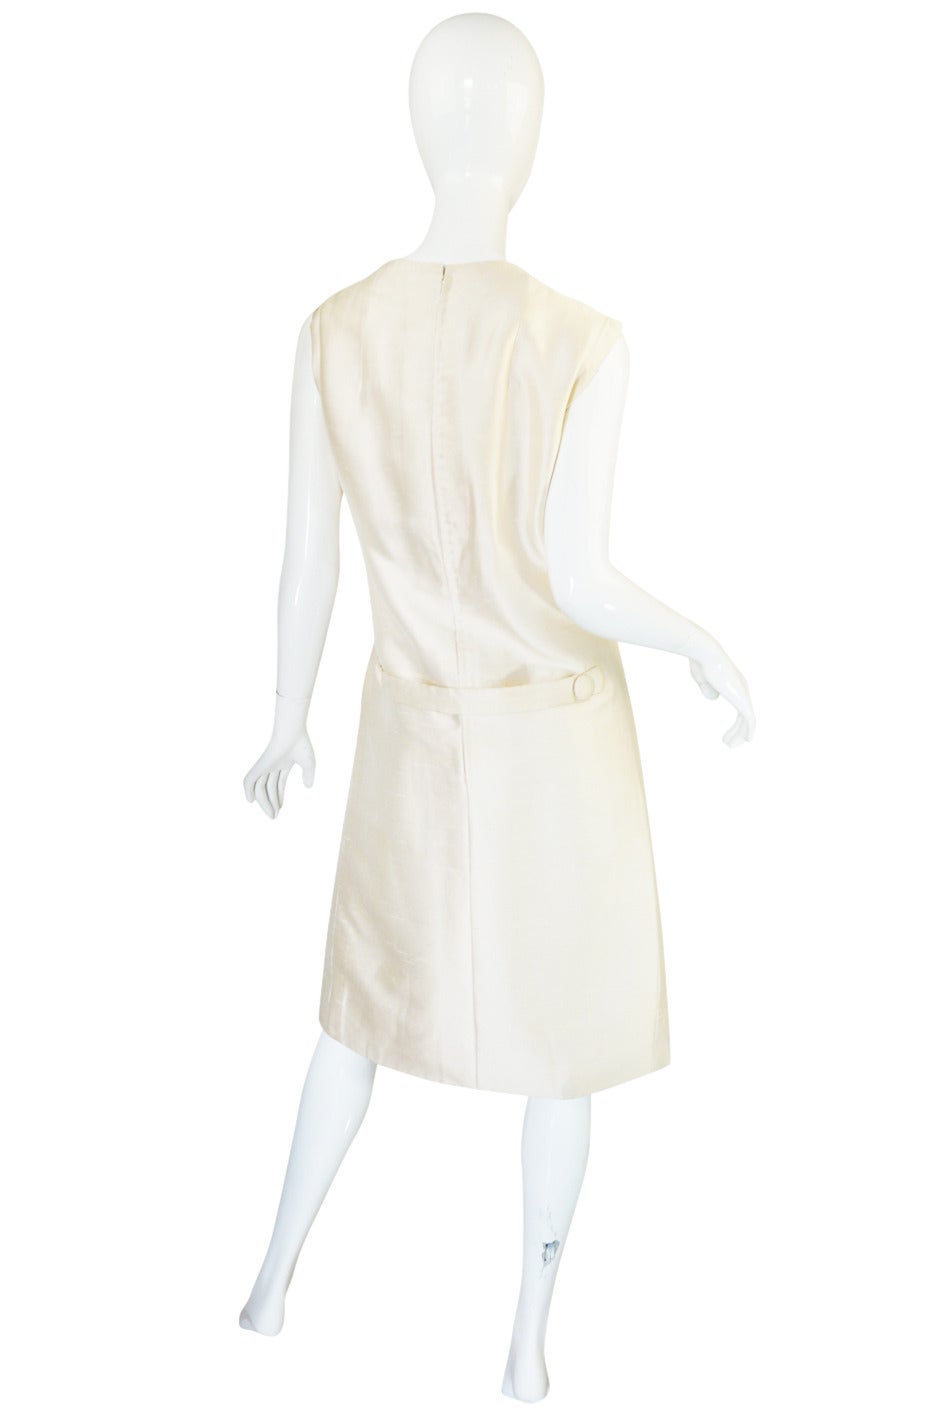 c1960 Christian Dior London Couture Numbered Coat & Dress 3